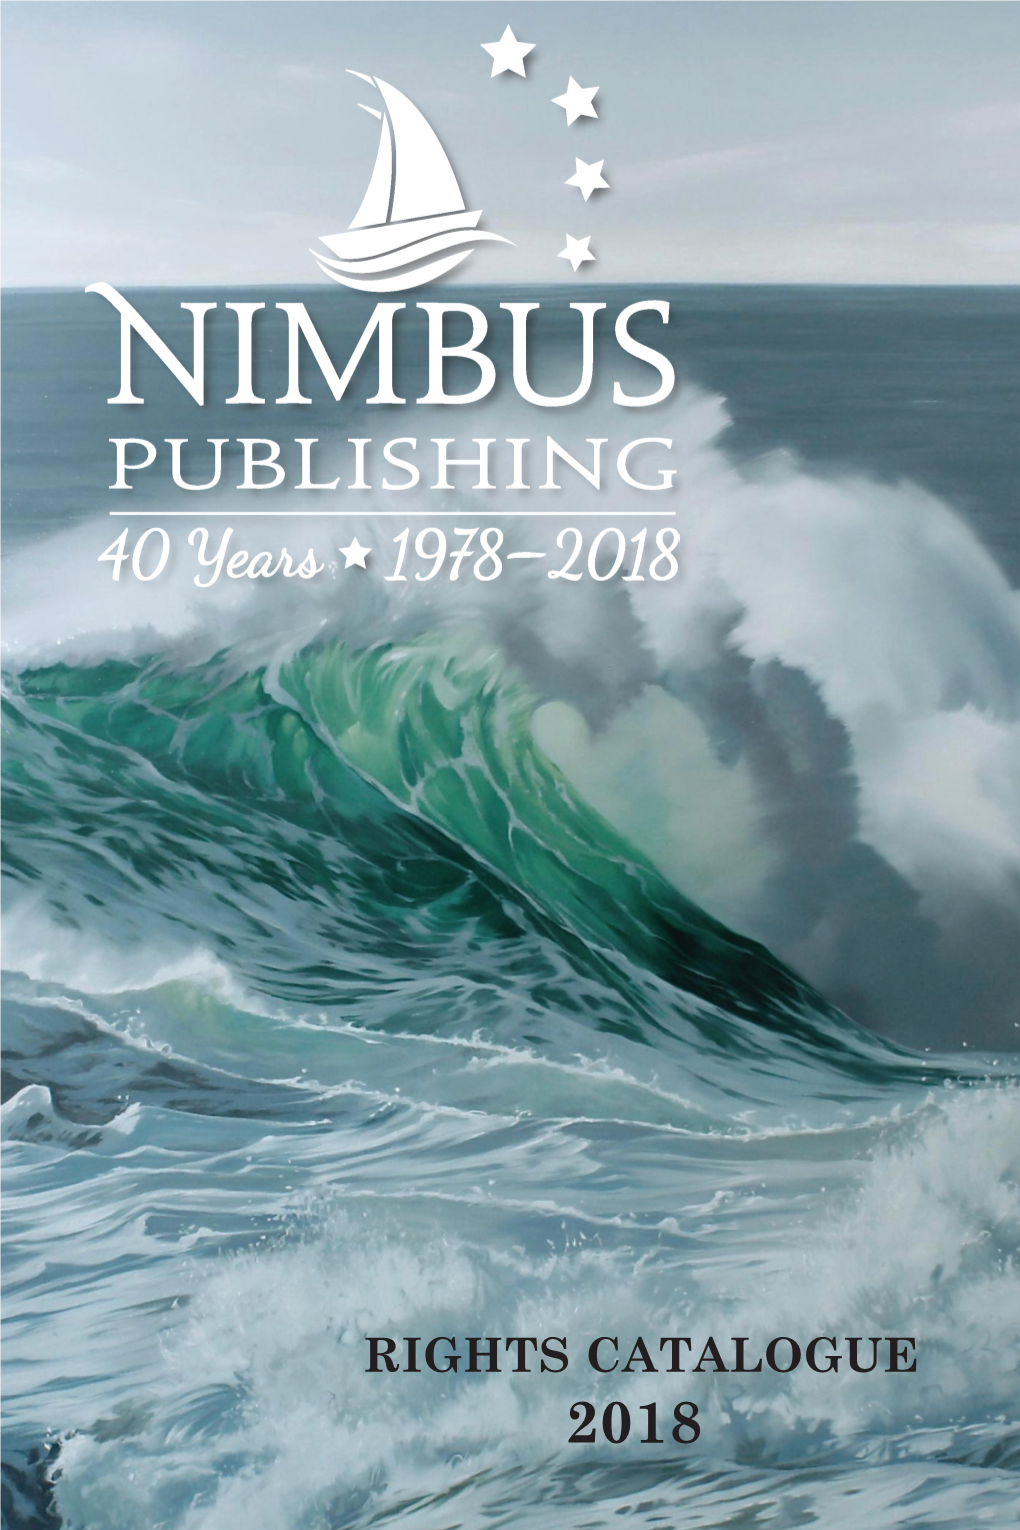 RIGHTS CATALOGUE 2018 Nimbus Publishing Is the Largest Canadian Book Publisher East of Toronto